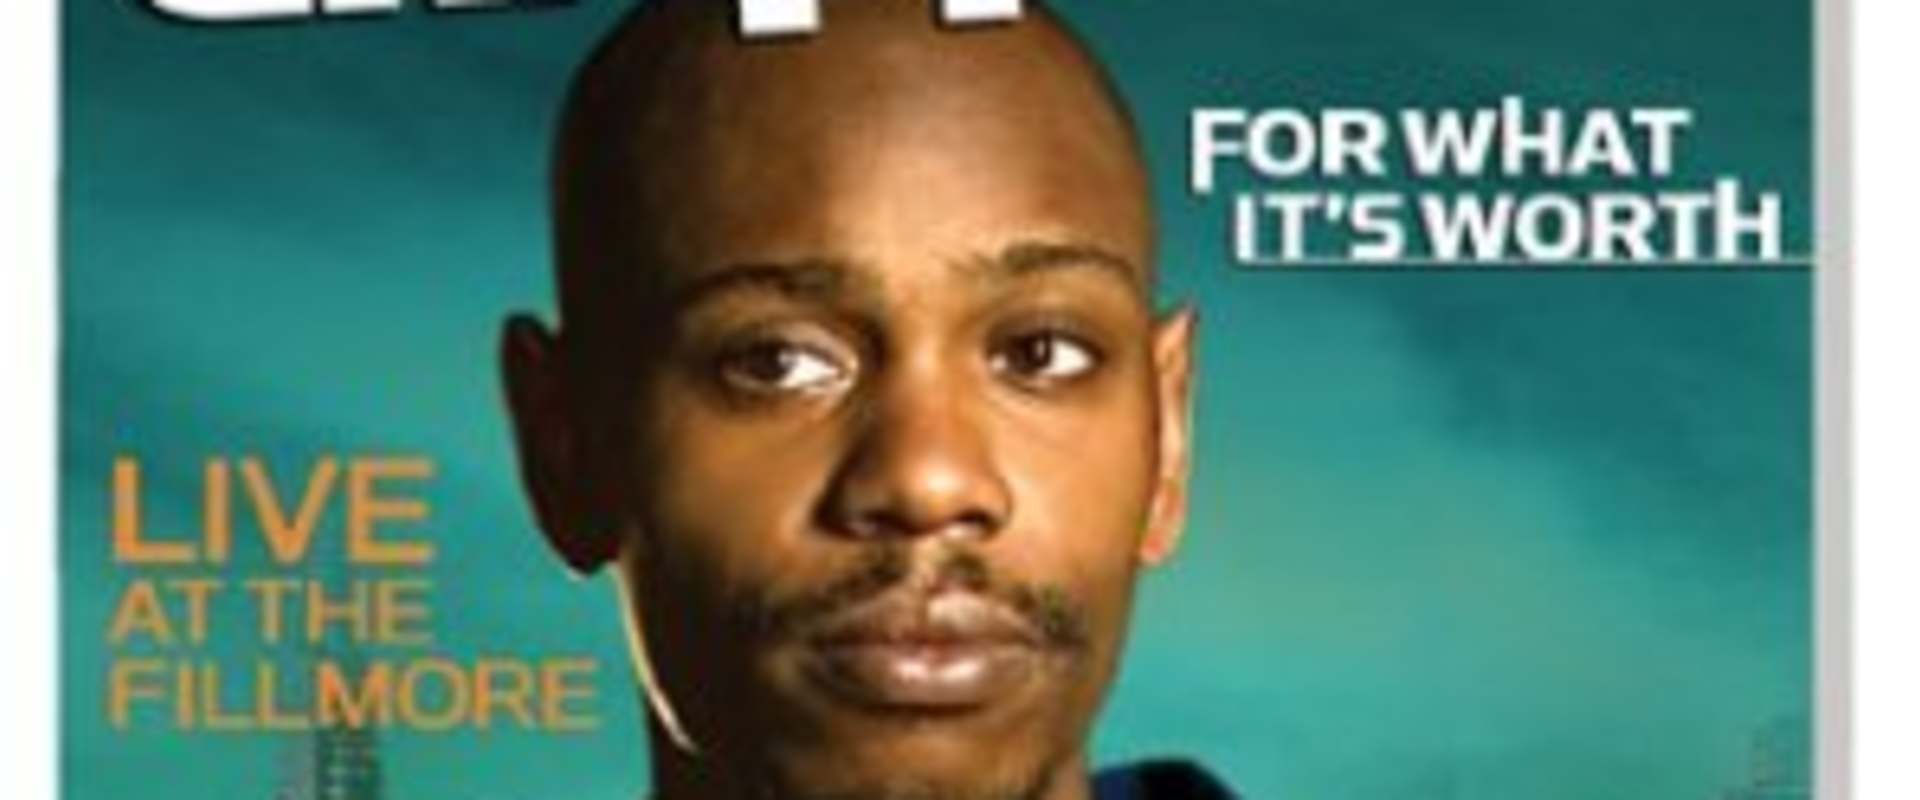 Dave Chappelle: For What It's Worth background 1